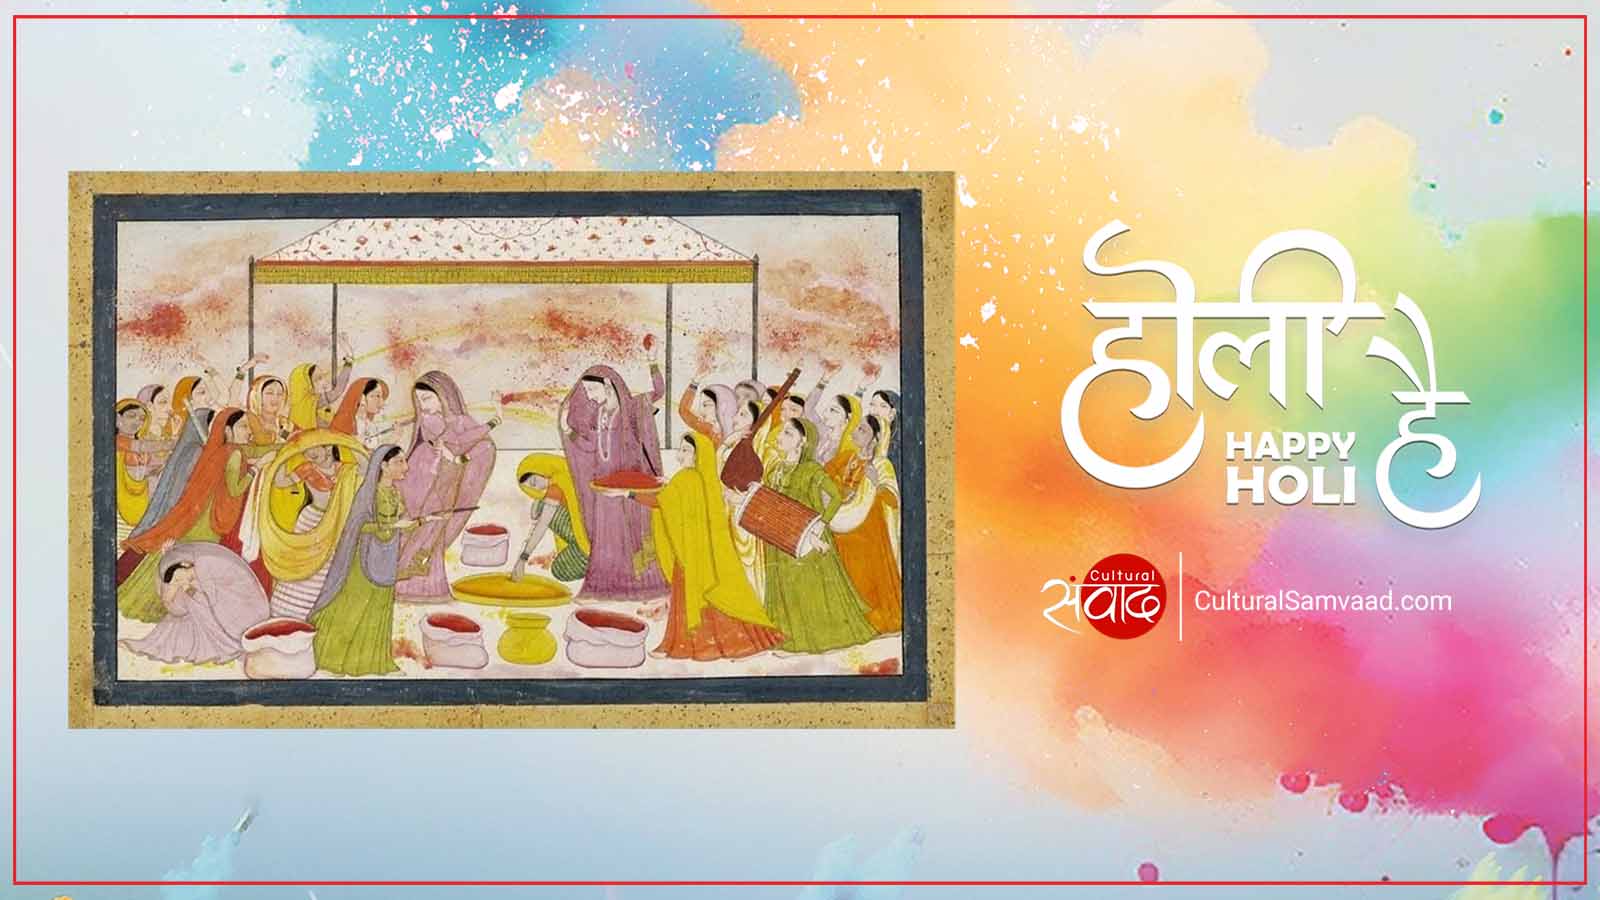 Happy Holi: Sanskrit, Hindi and English Greetings for the Festival of Colours